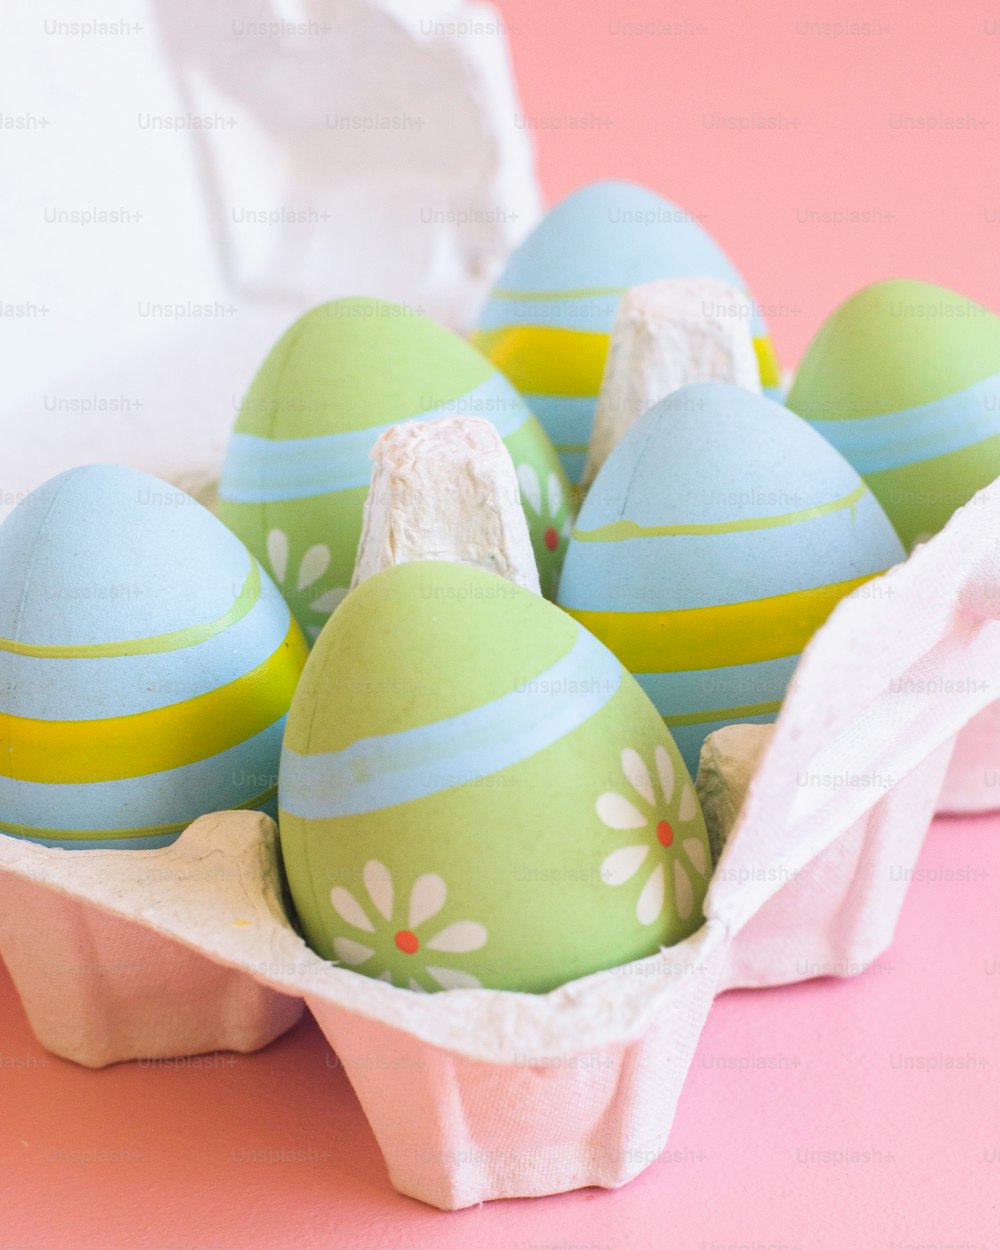 a carton filled with green and blue decorated eggs